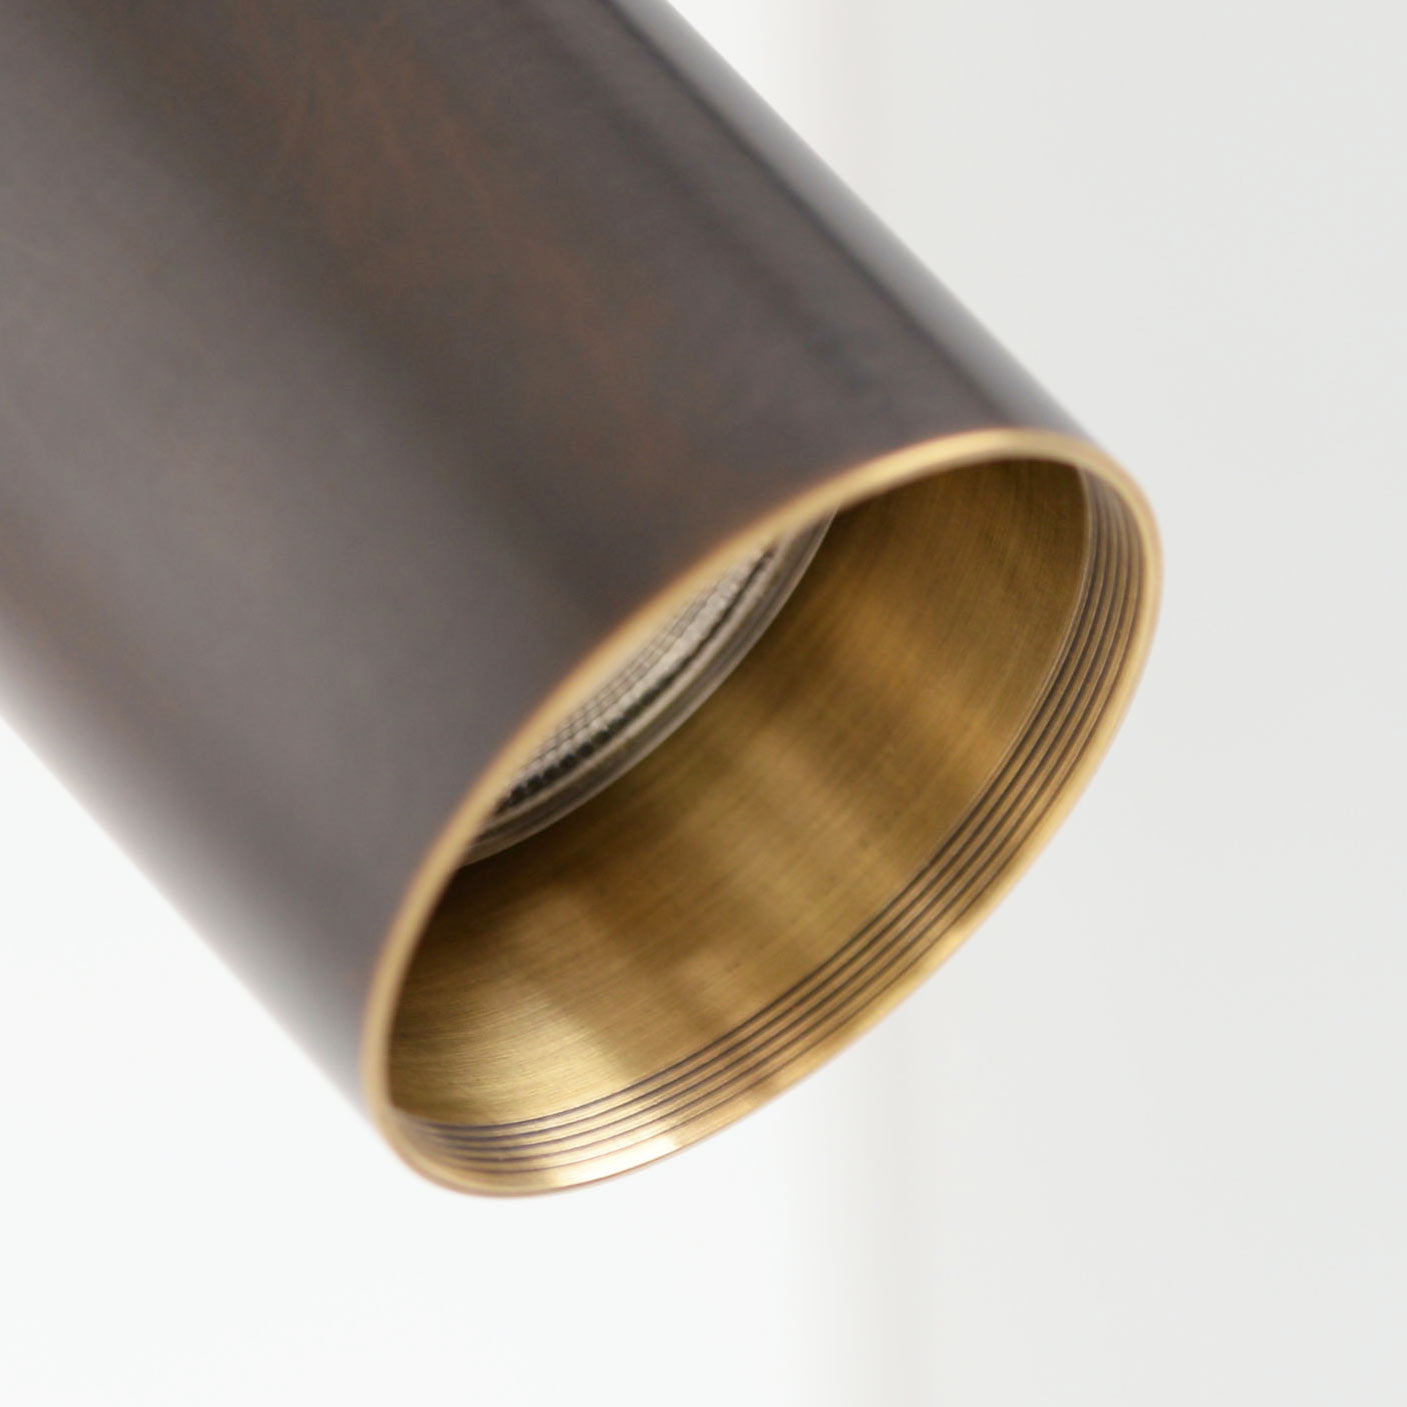 Detail on Arcform VIDERE in bronze, can be used as a bedroom wall light, supplied by South Charlotte Fine lighting